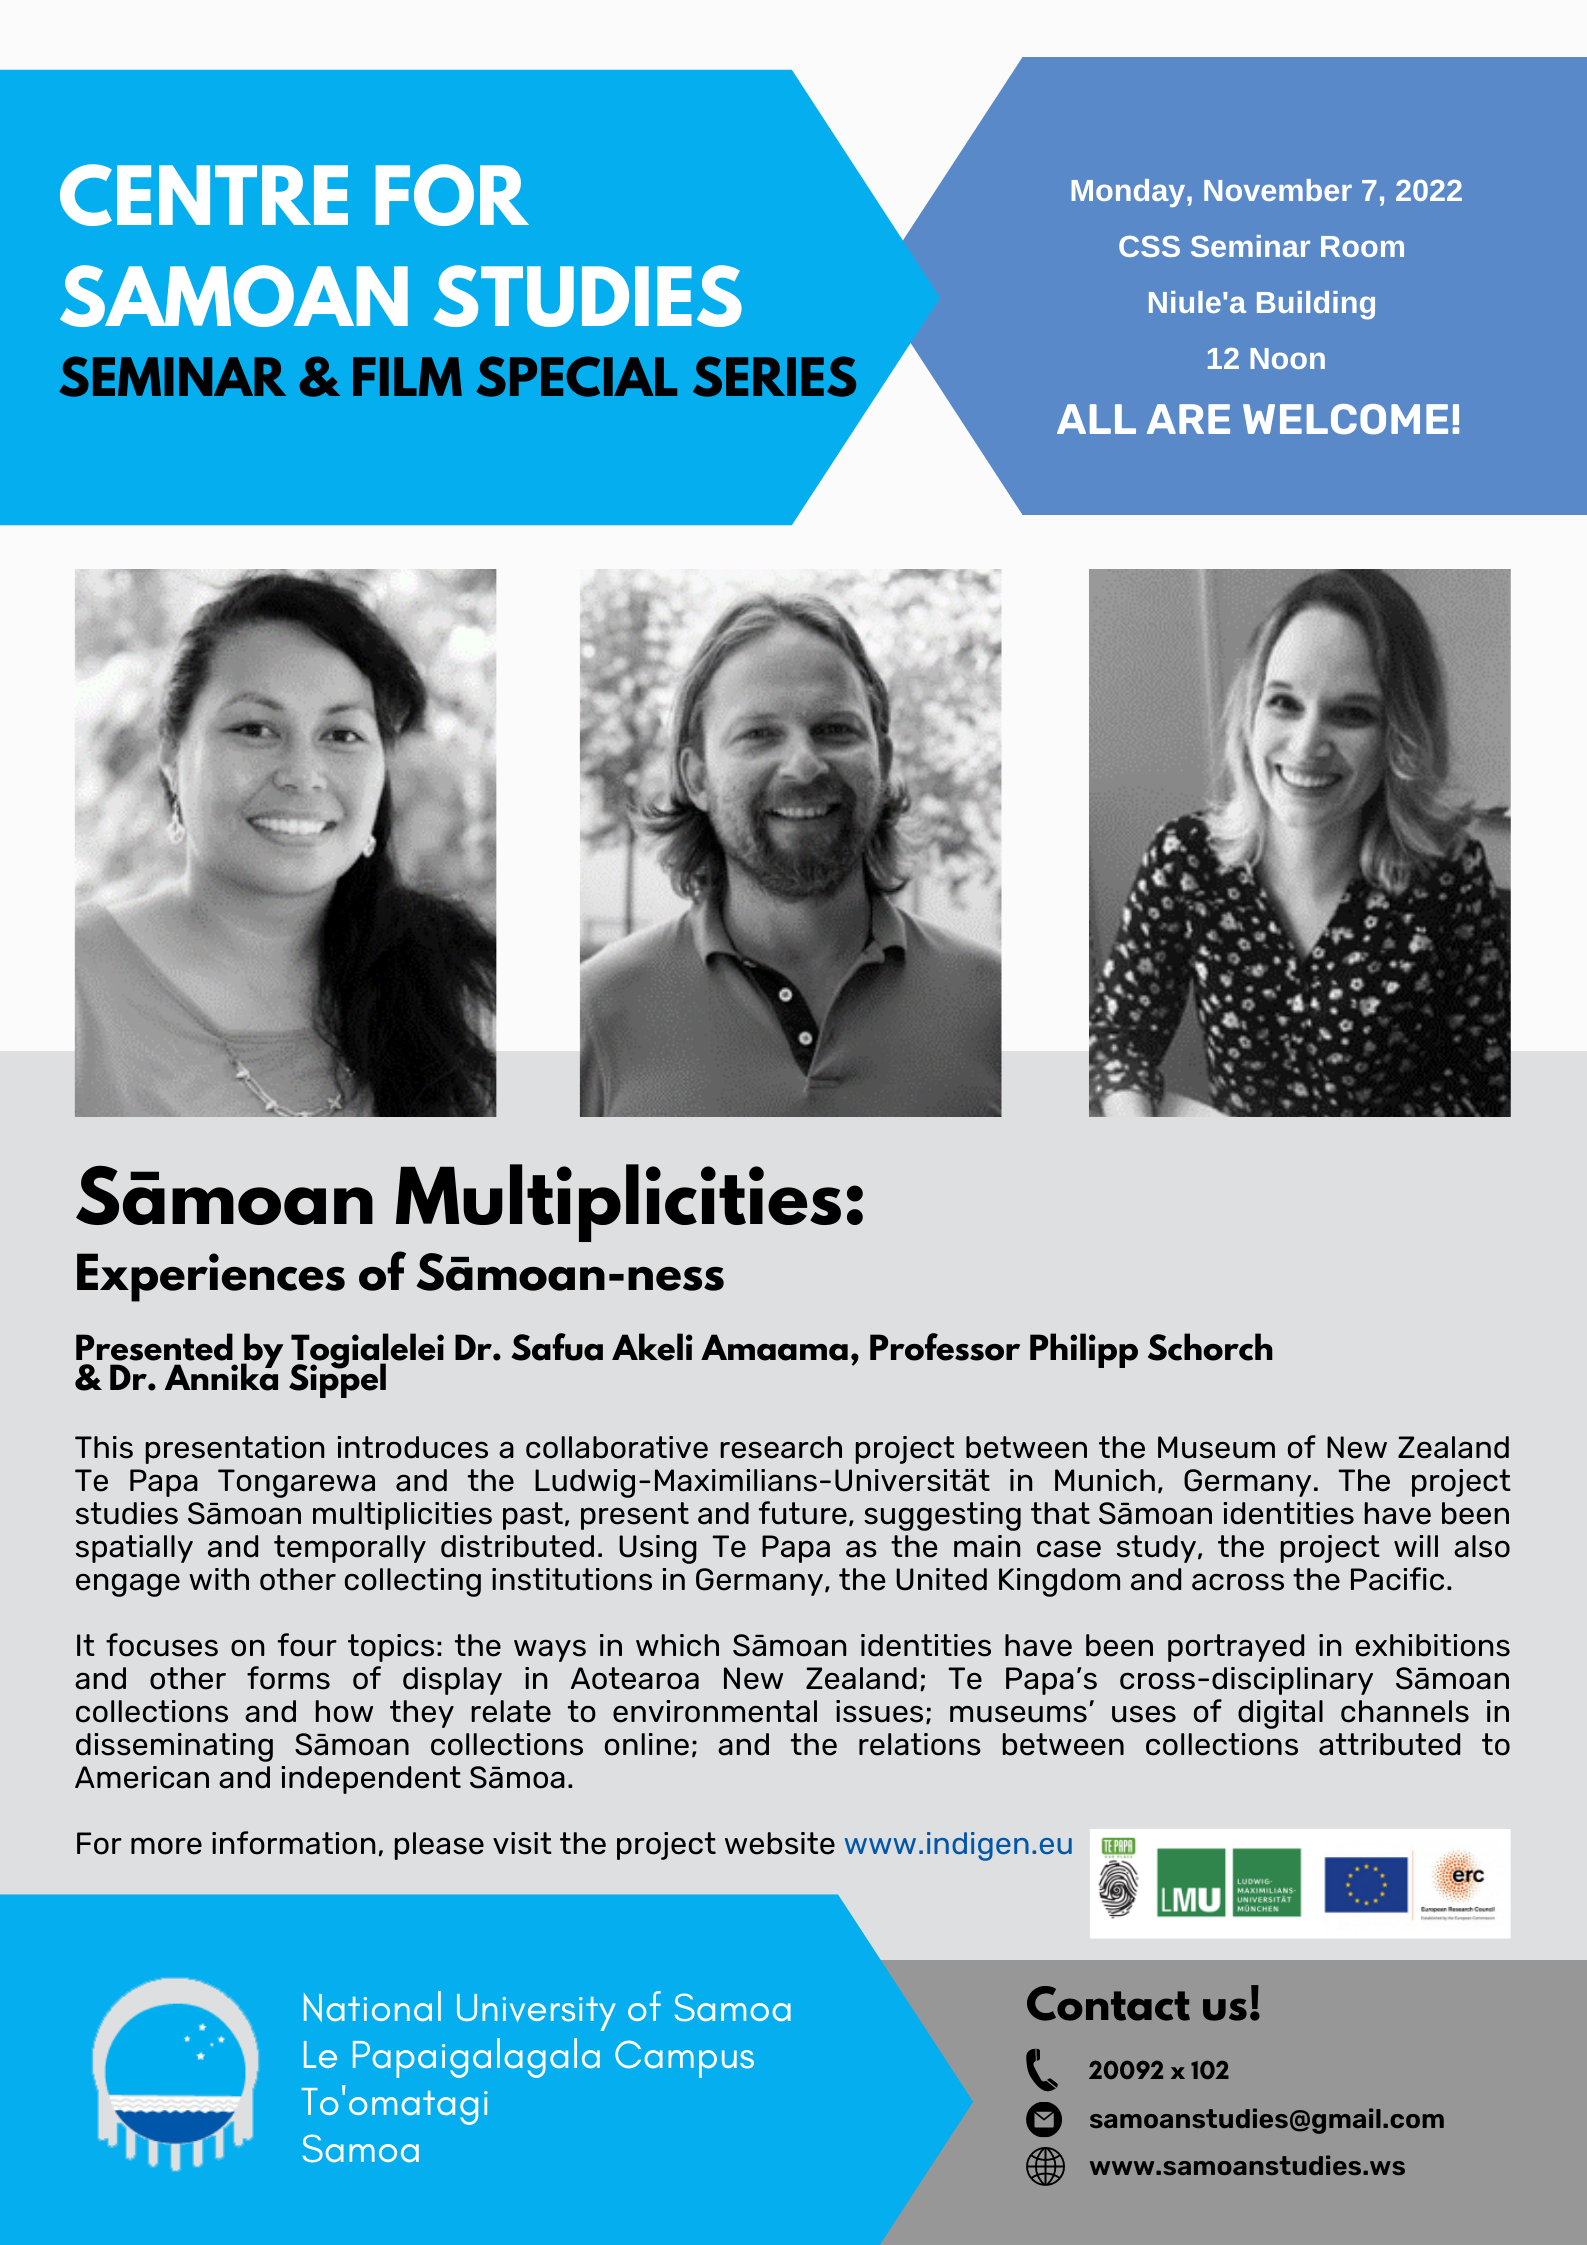 Announcement flyer by the Centre for Samoan Studies